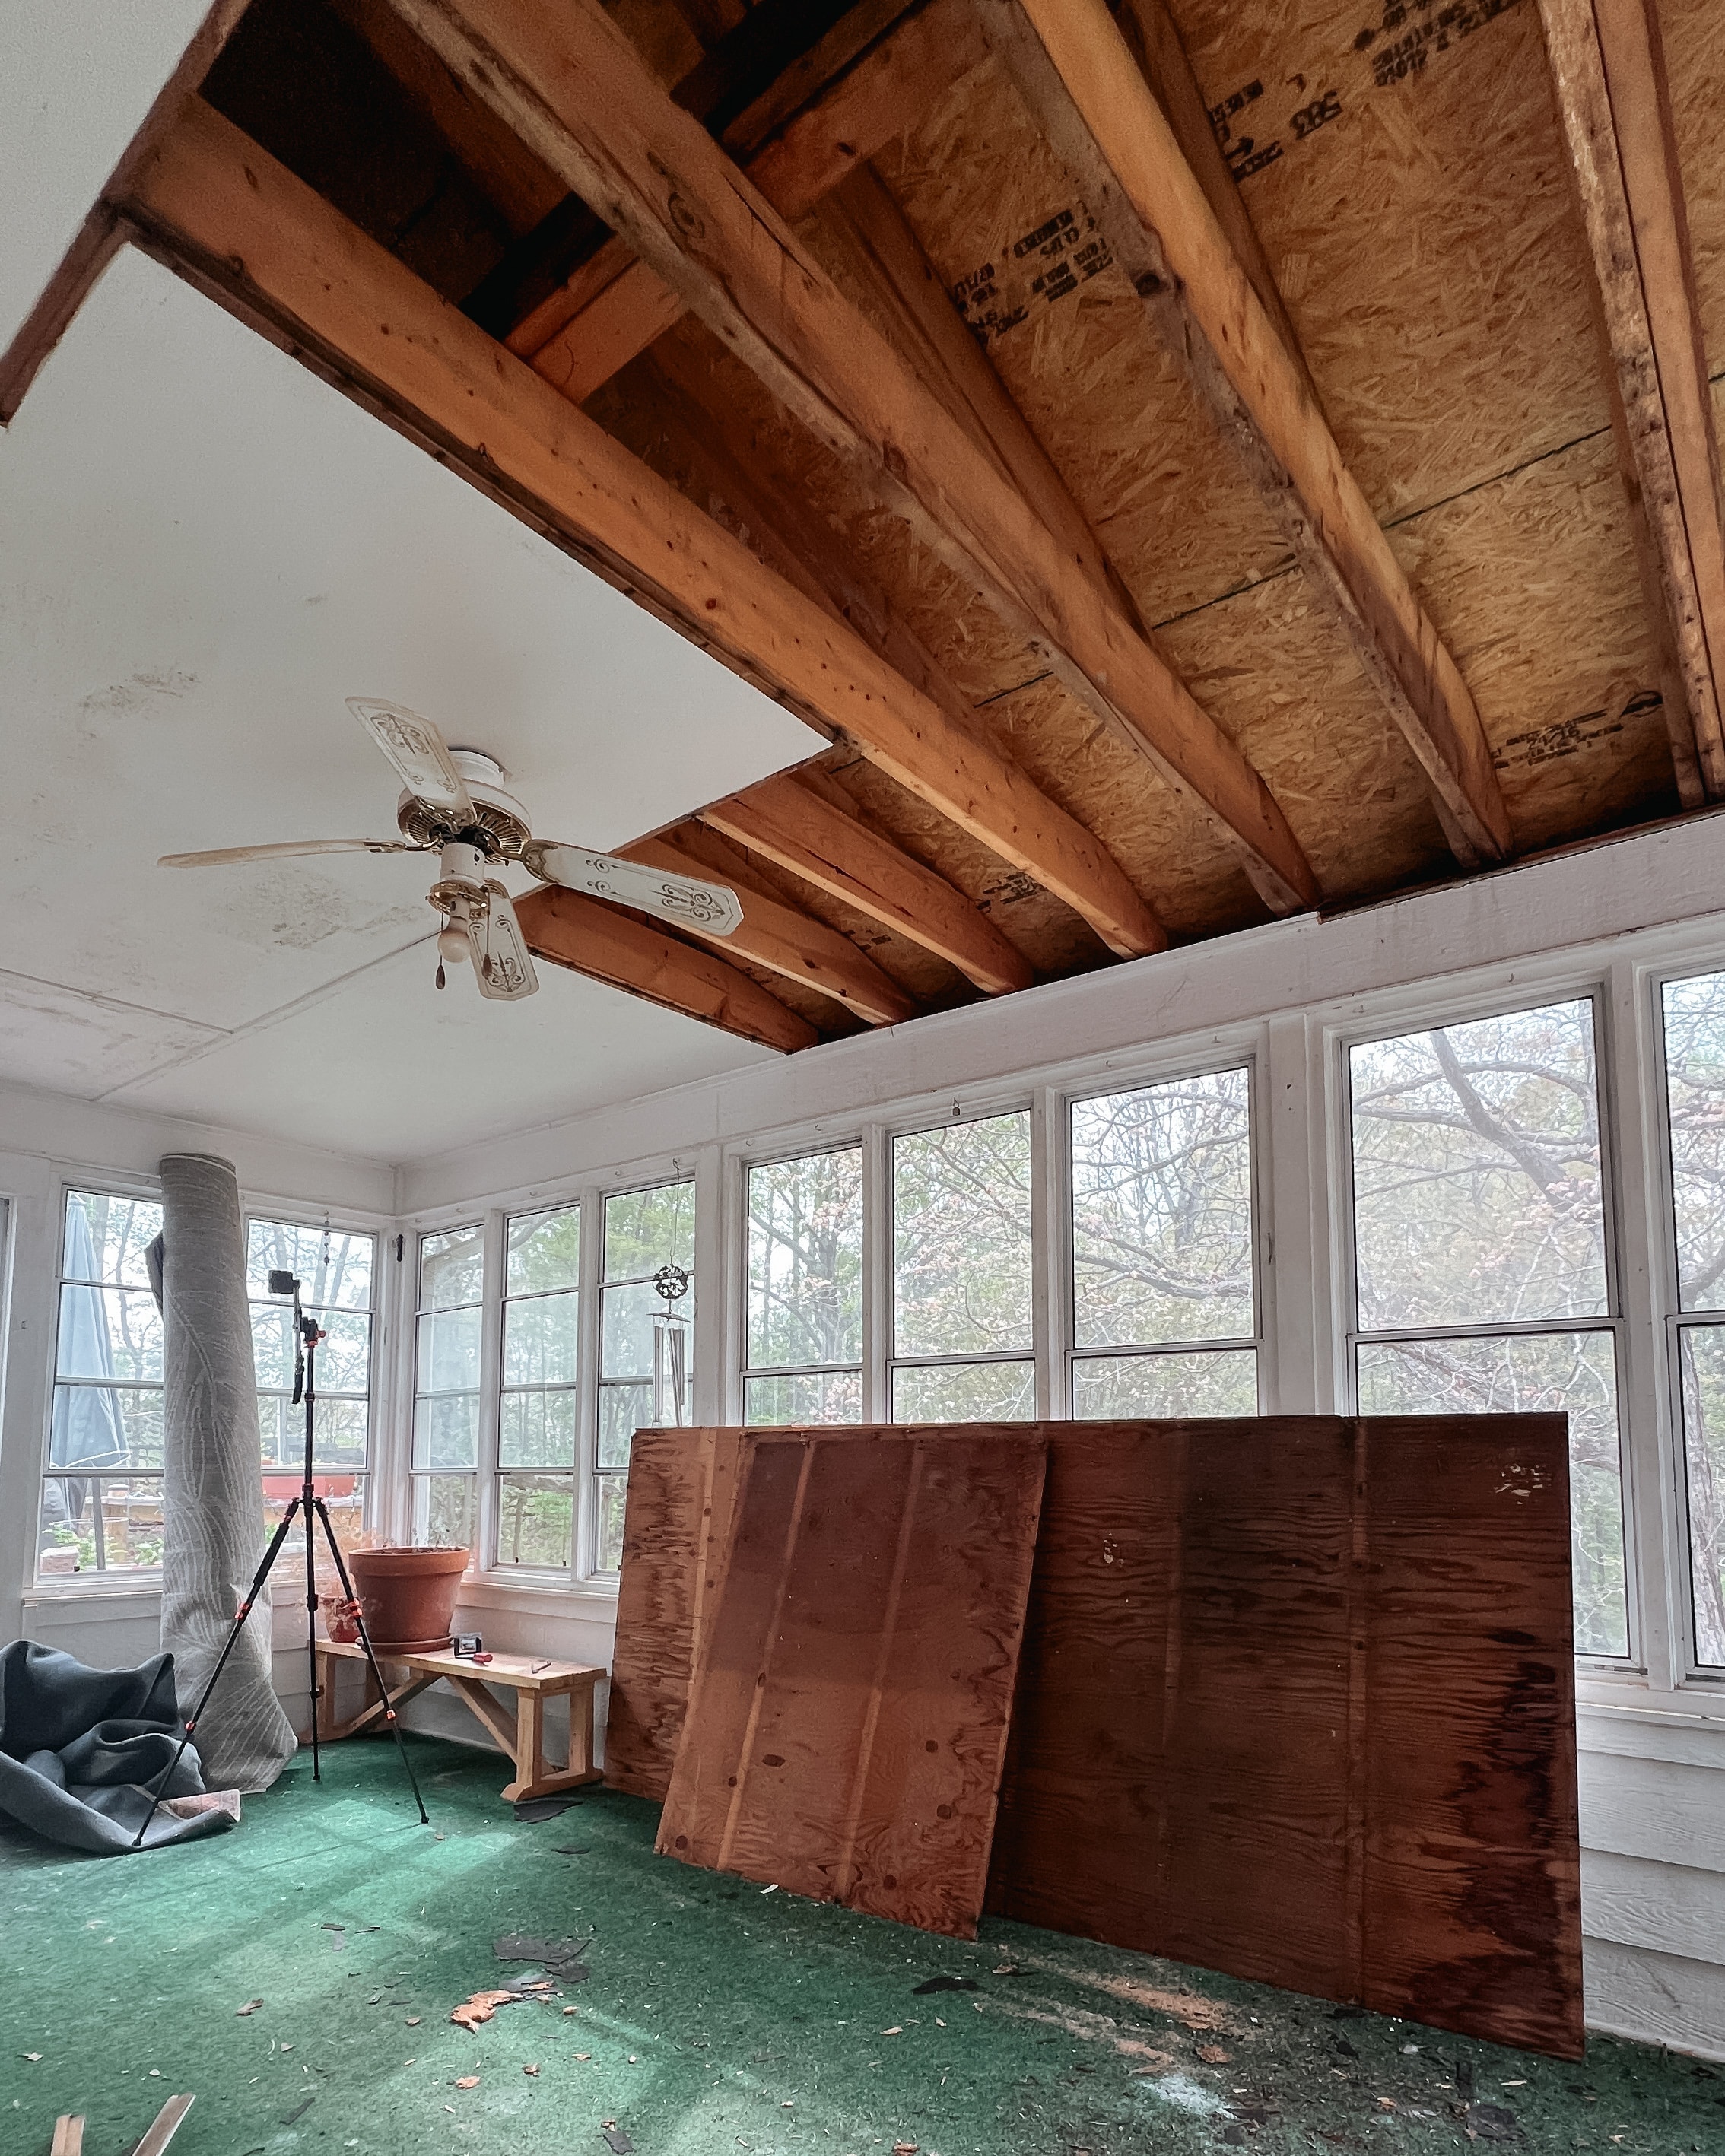 An unfinished ceiling with exposed boards